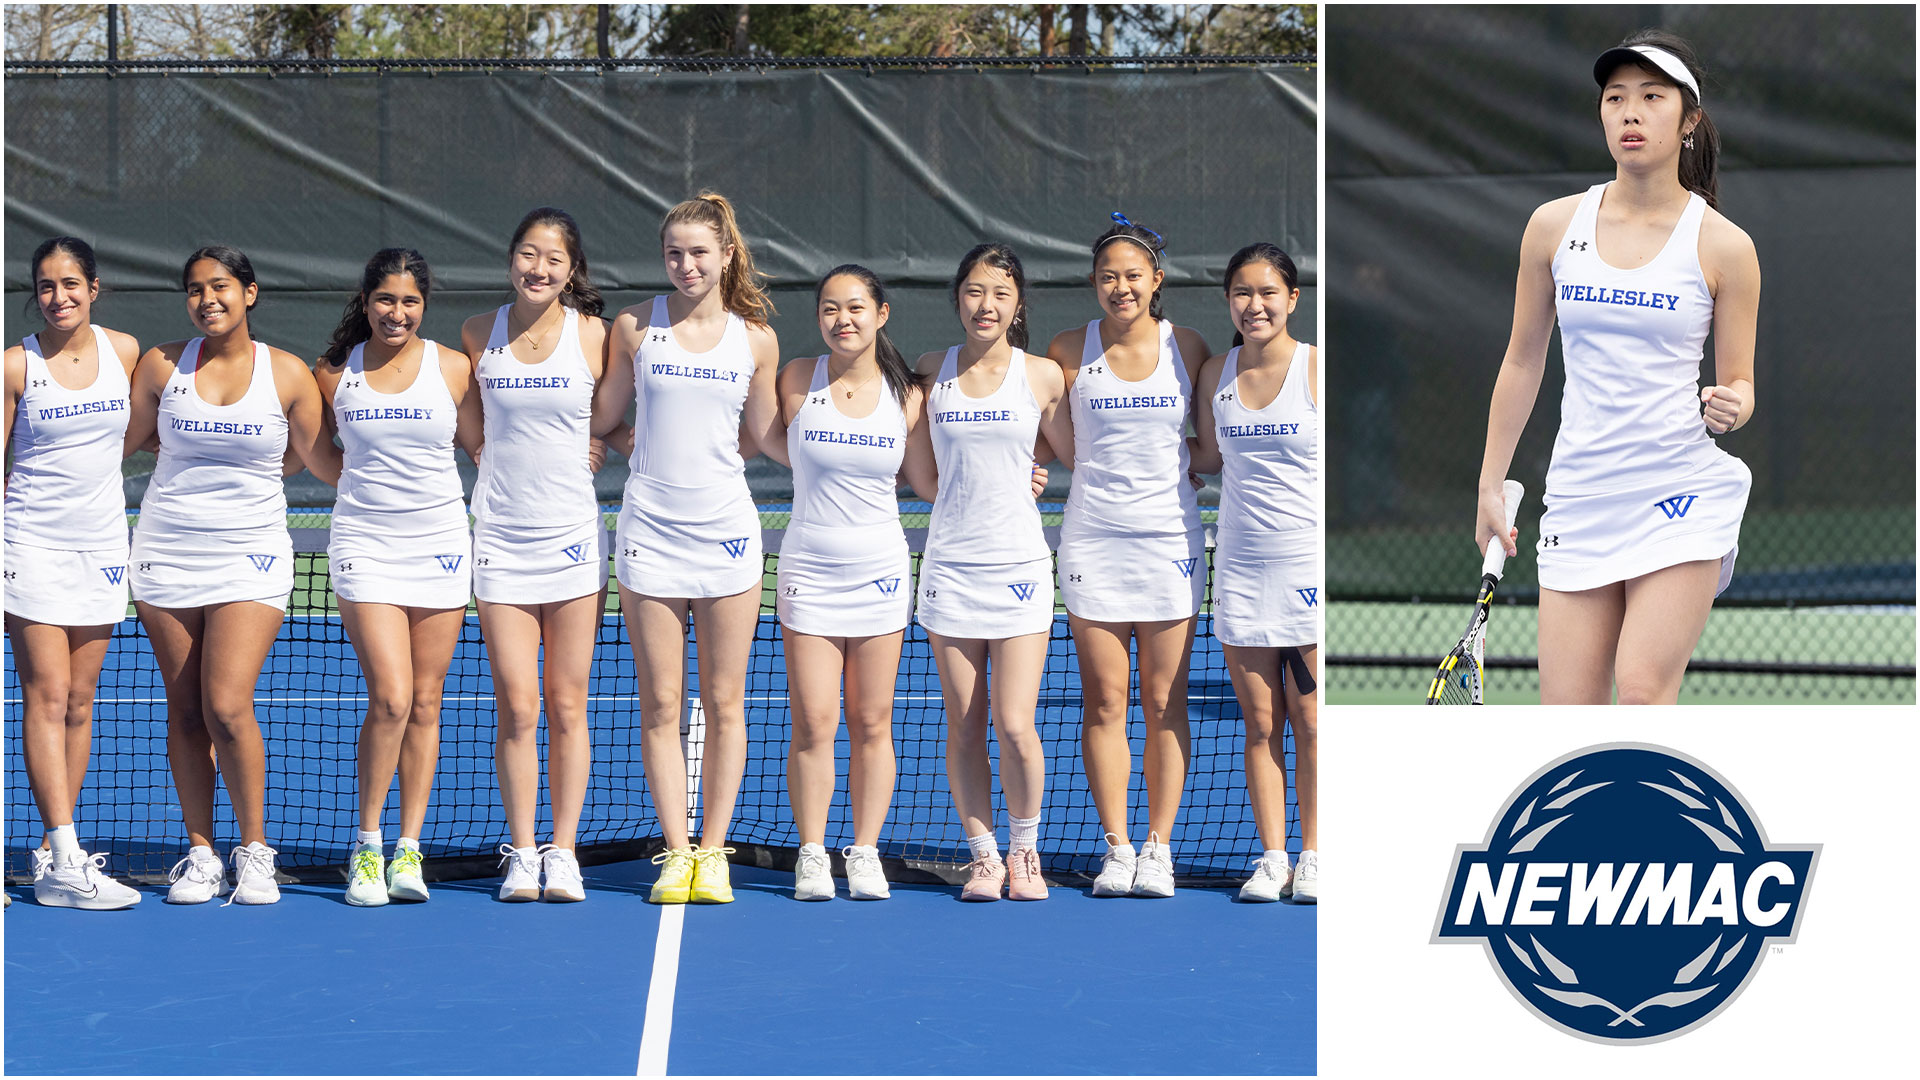 No. 3 Wellesley College tennis will host No. 6 Springfield at 3:00 PM on Tuesday, April 30 (Frank Poulin)